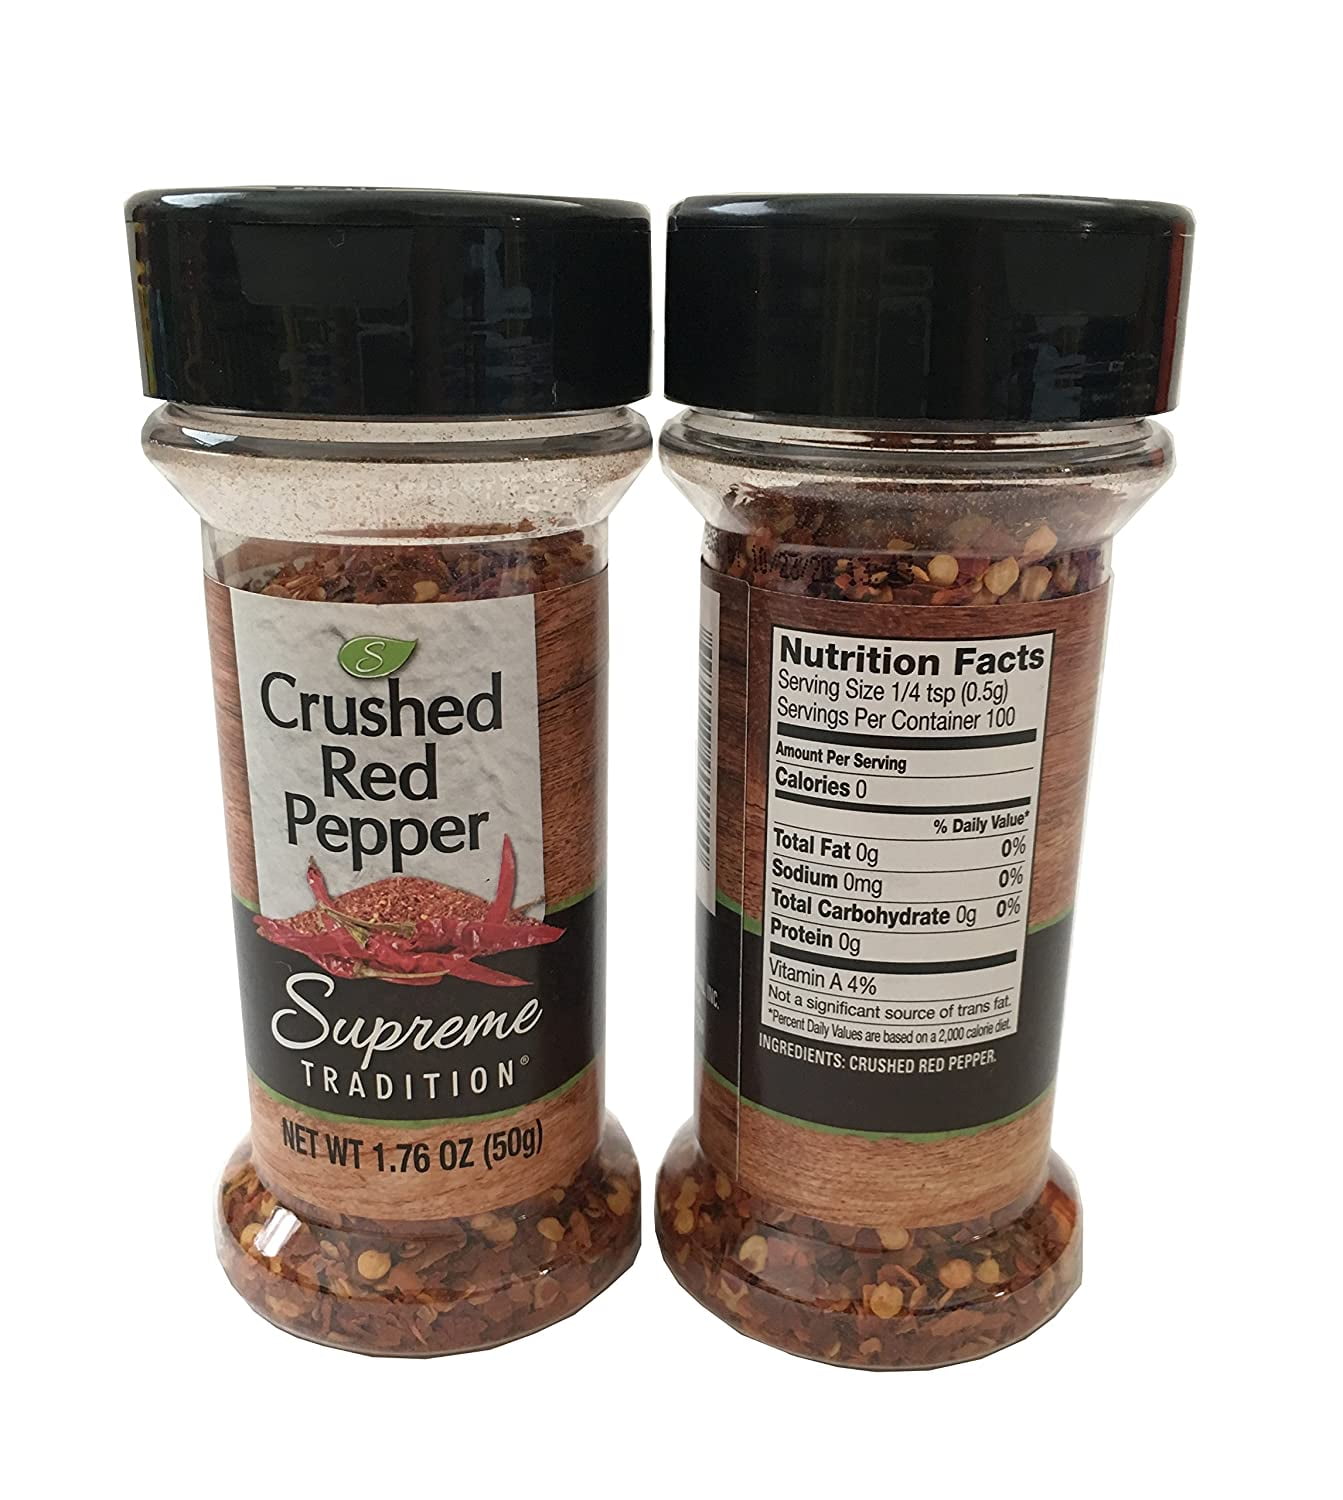 The Essential Spice Starter Set - Red Stick Spice Company